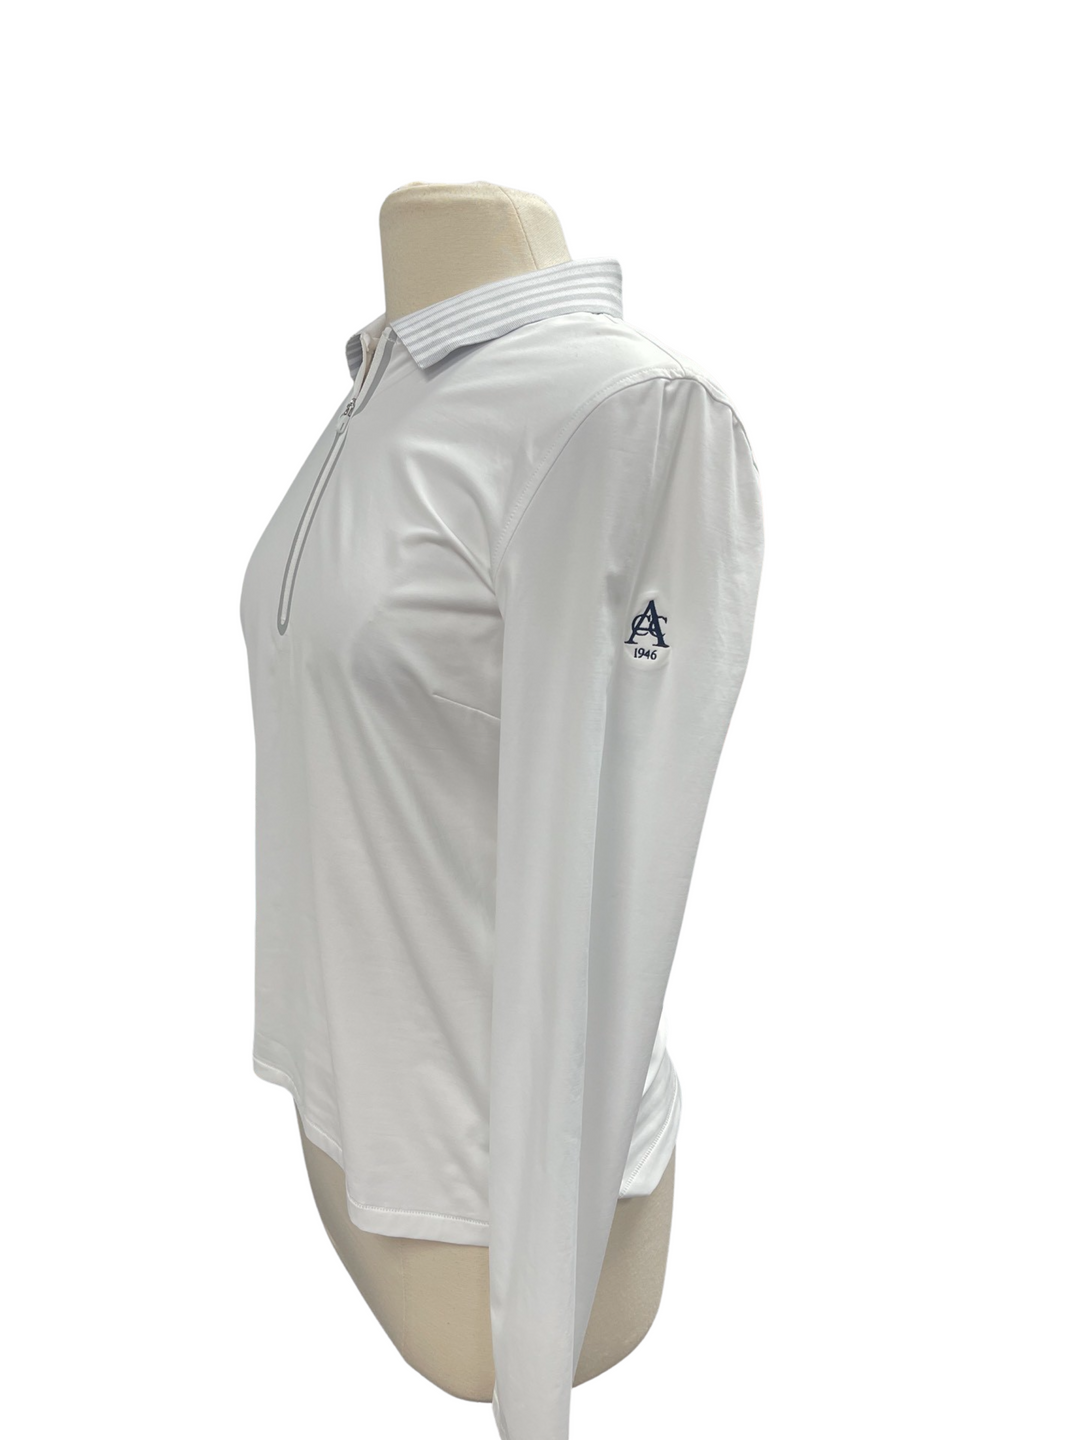 G/FORE Featherweight Longsleeve Polo - White